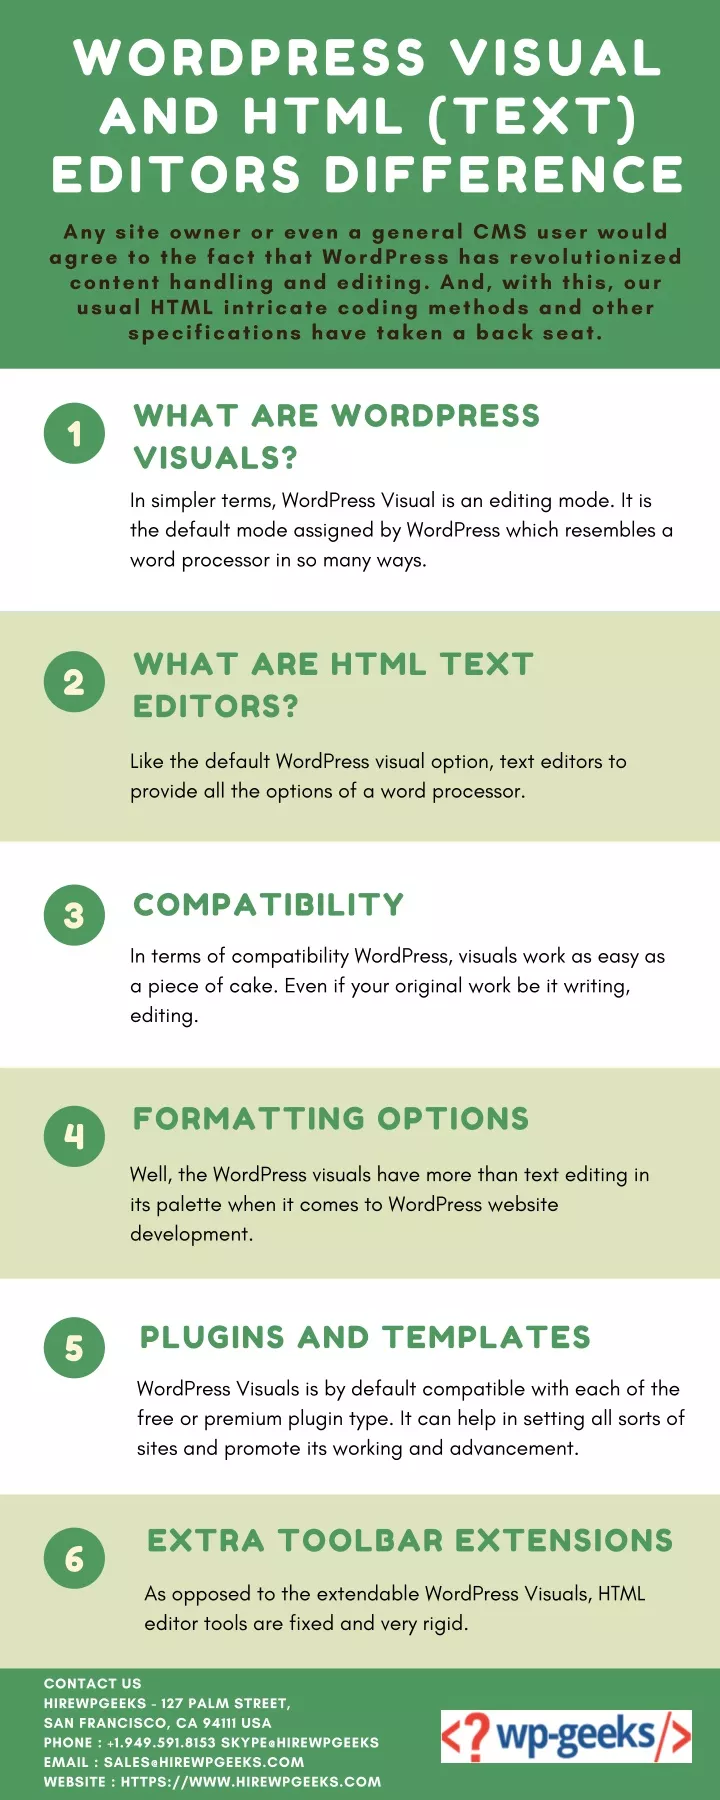 wordpress visual and html text editors difference